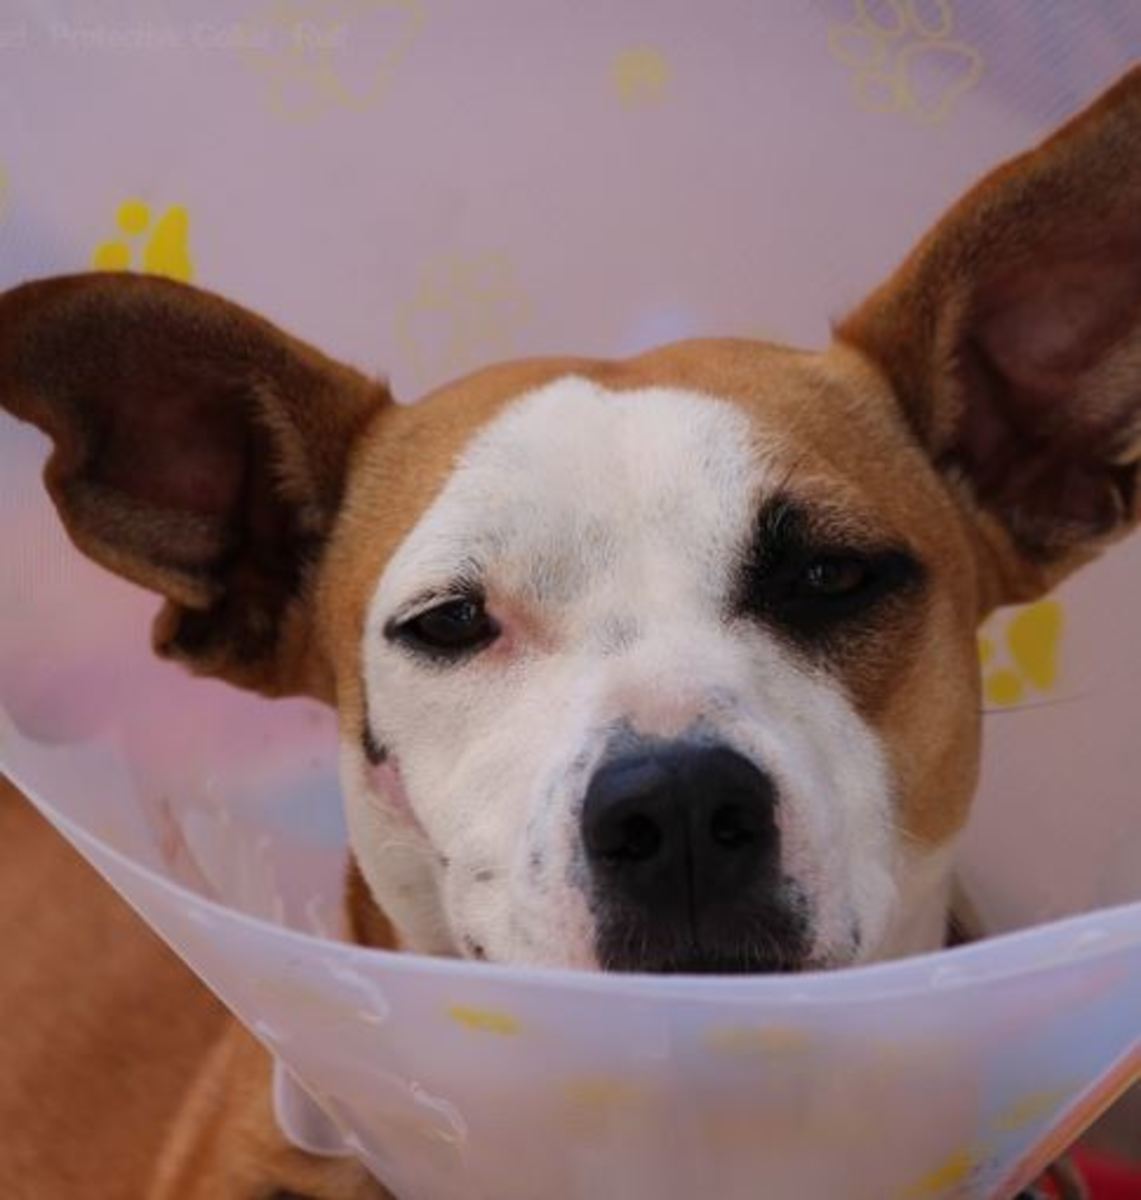  An Elizabethan collar helps prevent your dog from a popping a stitch